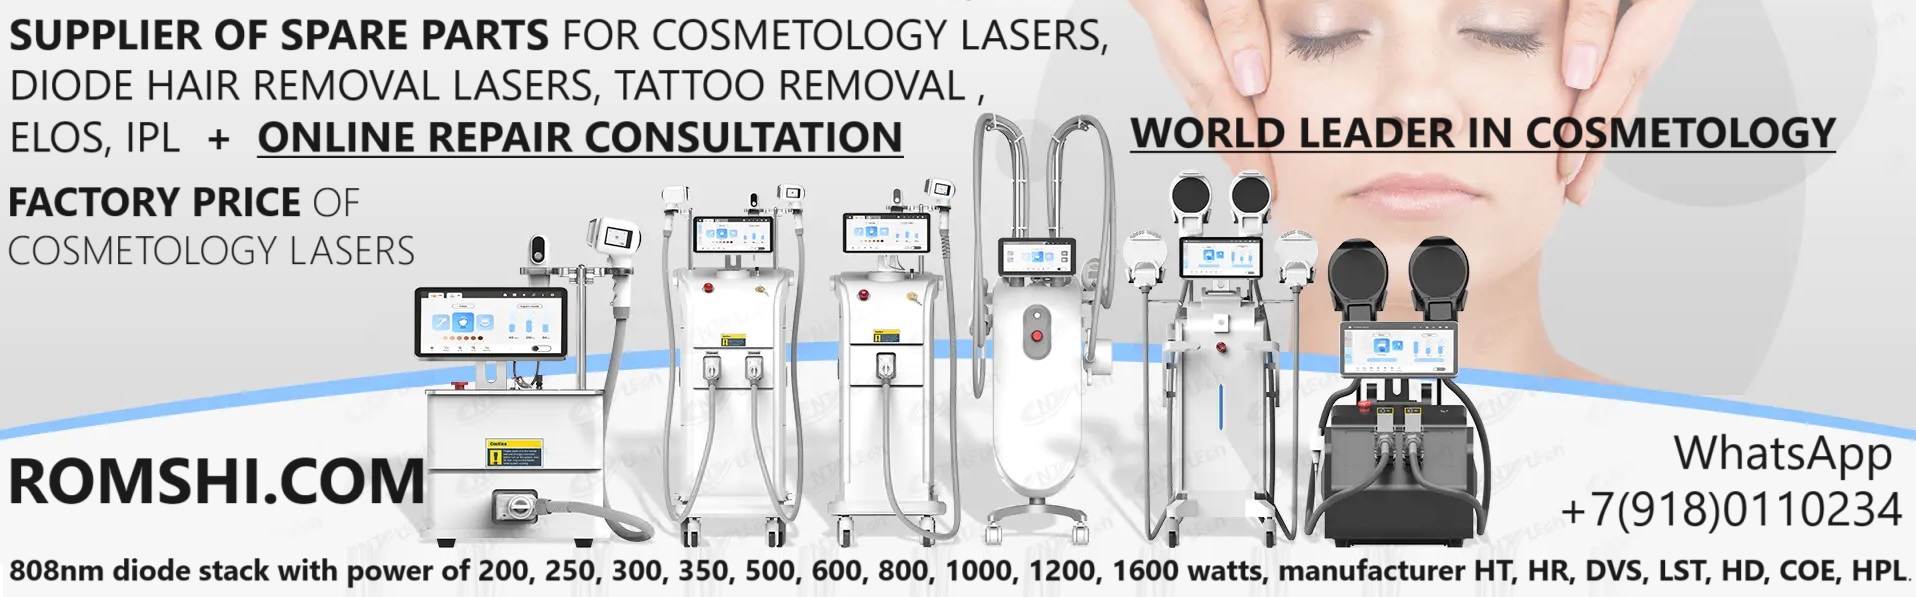 Repair of cosmetology equipment, sale of lasers for hair removal, tattoo removal, EMS laser stacks of 808nm diode laser handpieces | romshi.com